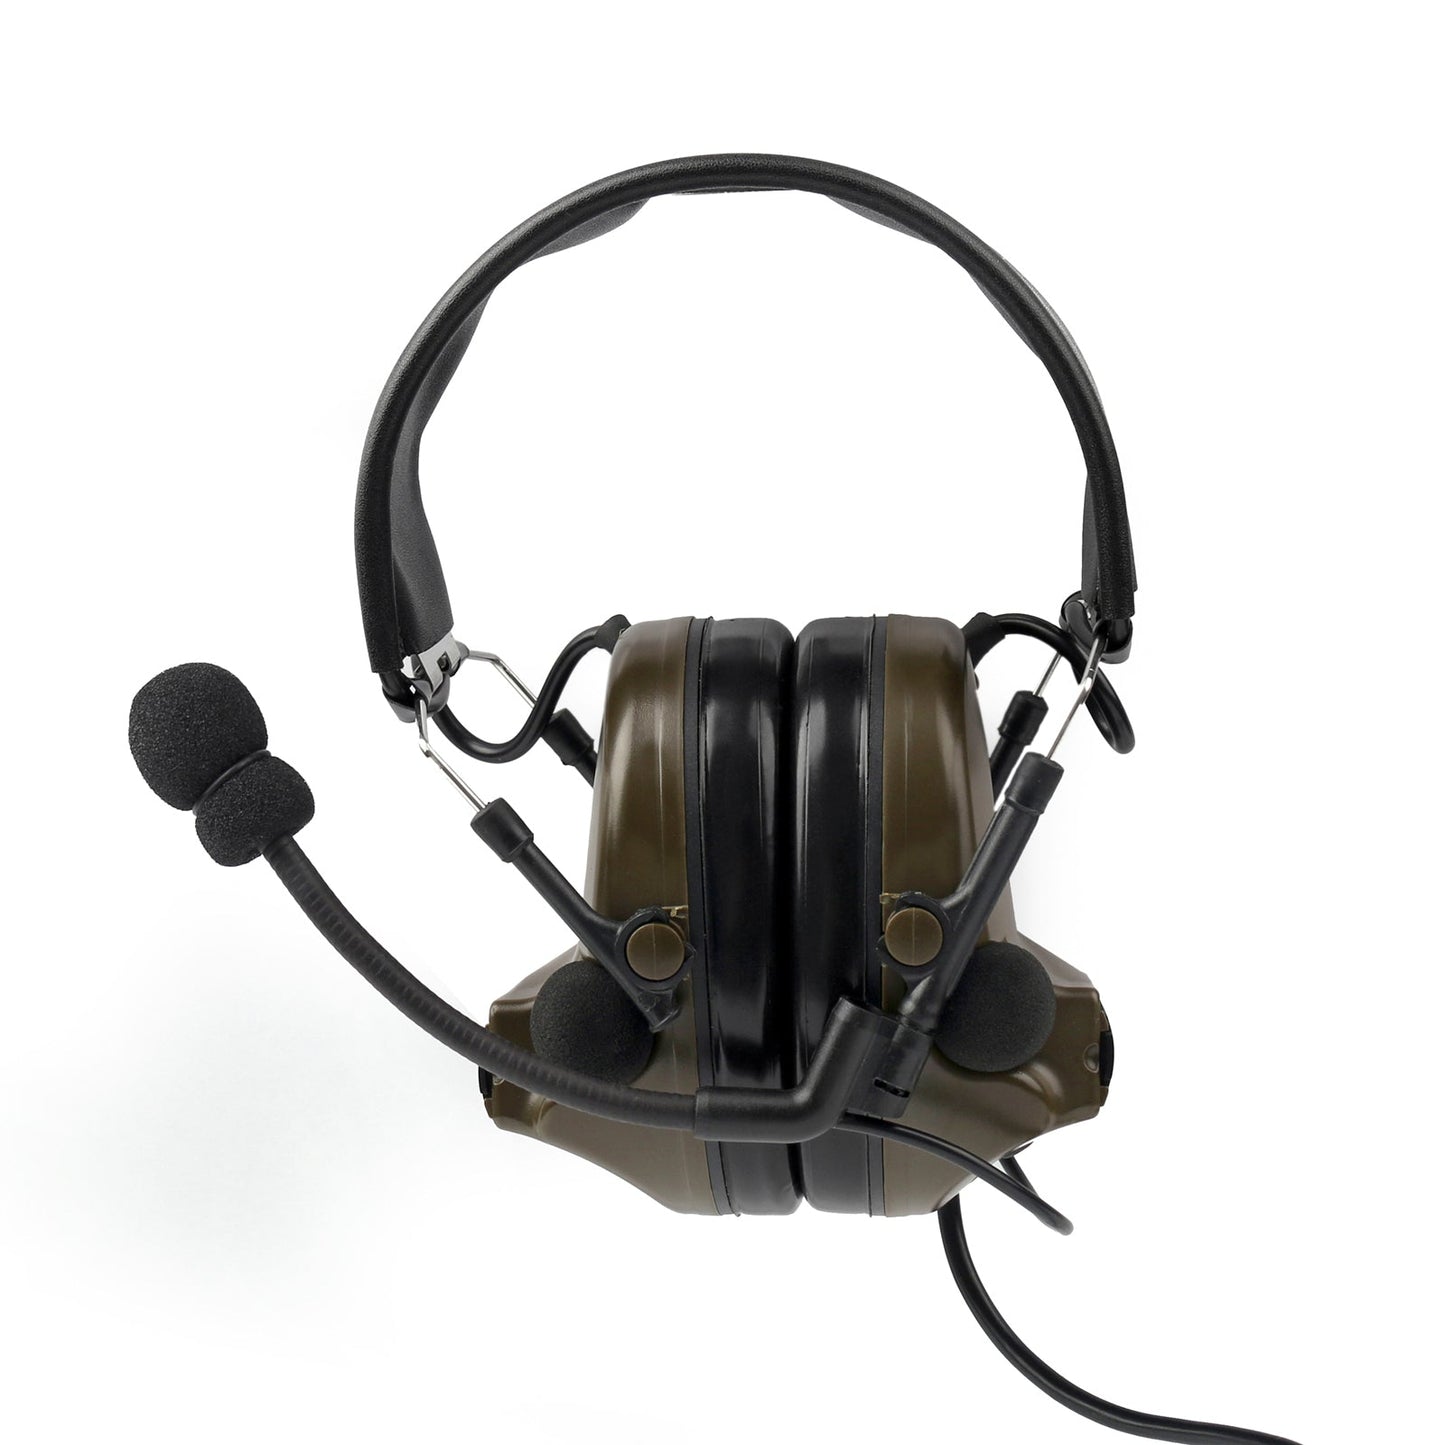 Z Tactical H50 Headset For Hytera HYT PD600 PD602 PD602g PD605 PD660 PD662 PD665